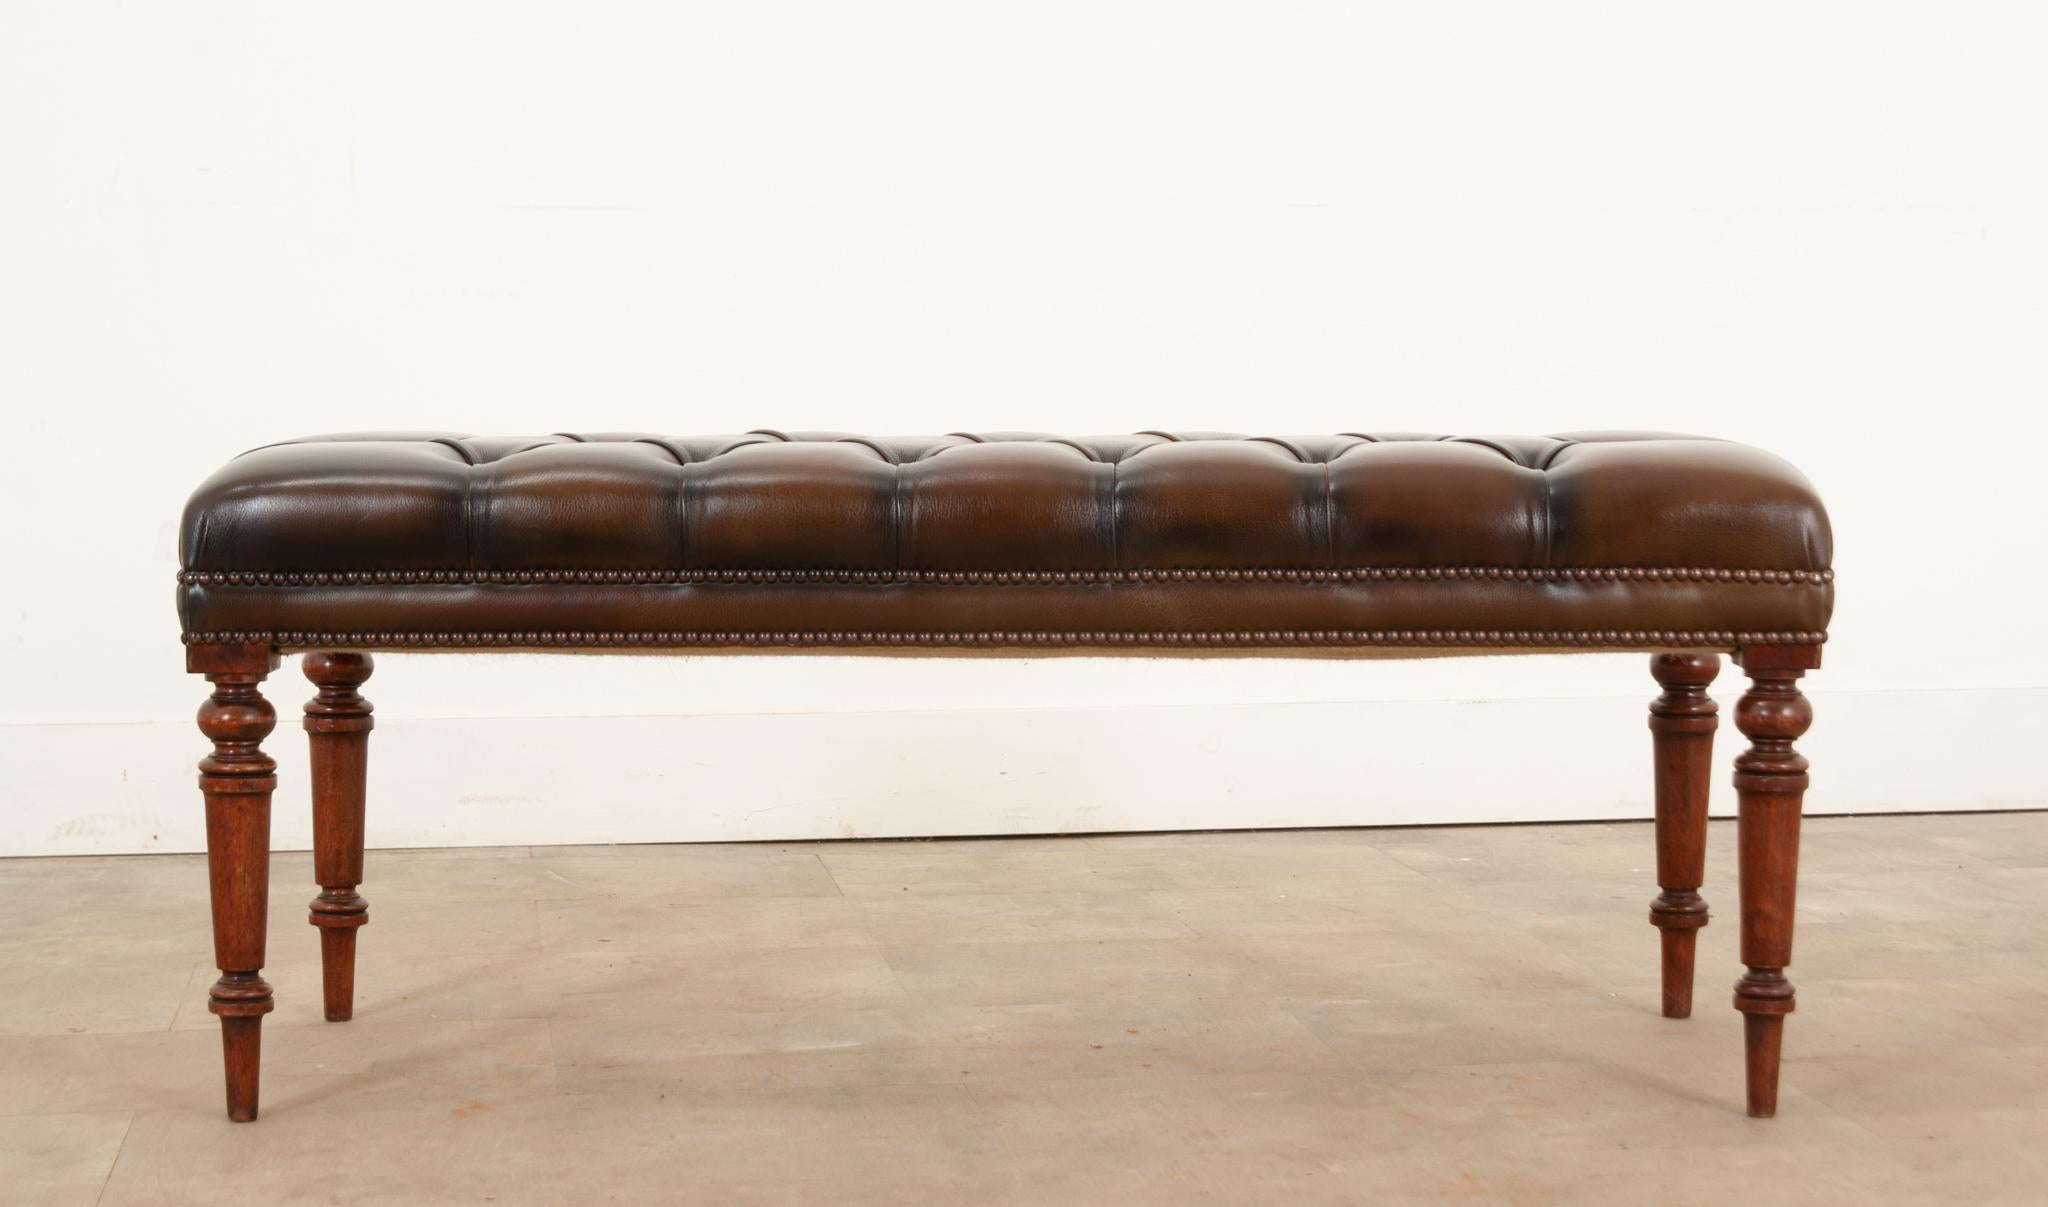 Edwardian English Early 20th Century Tufted Leather Bench